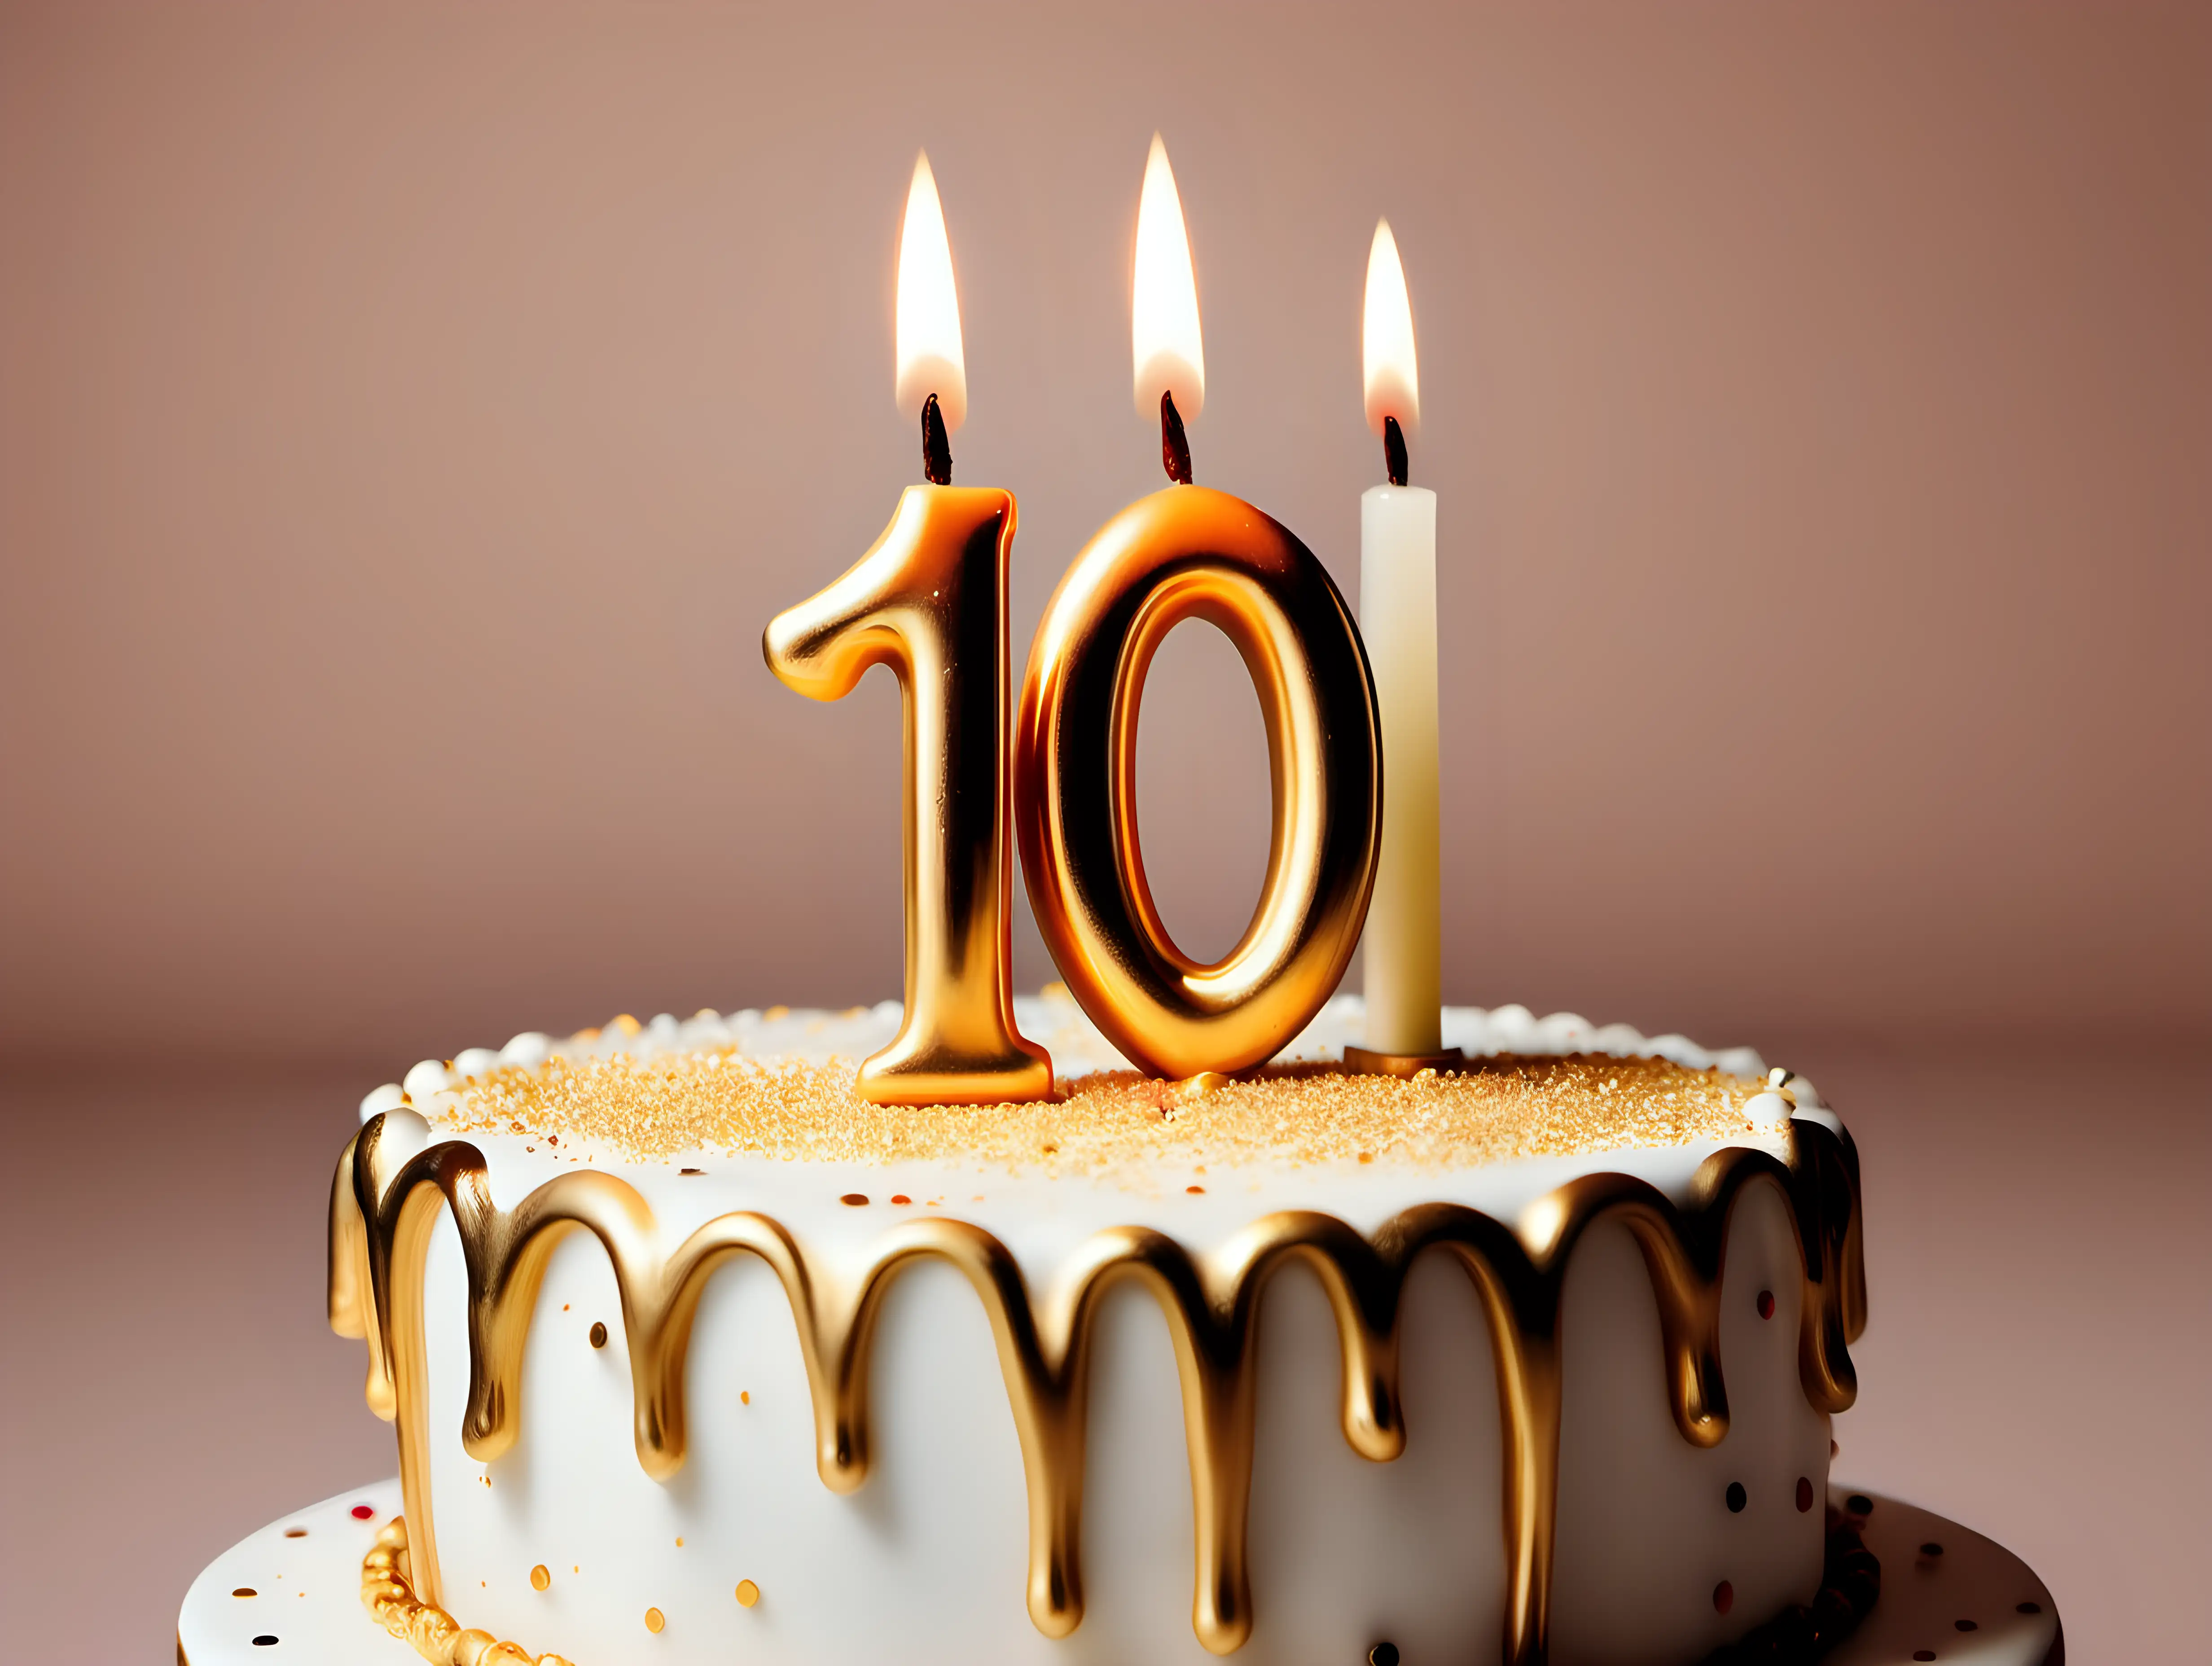 Realistic Gold 10th Candle Birthday Cake